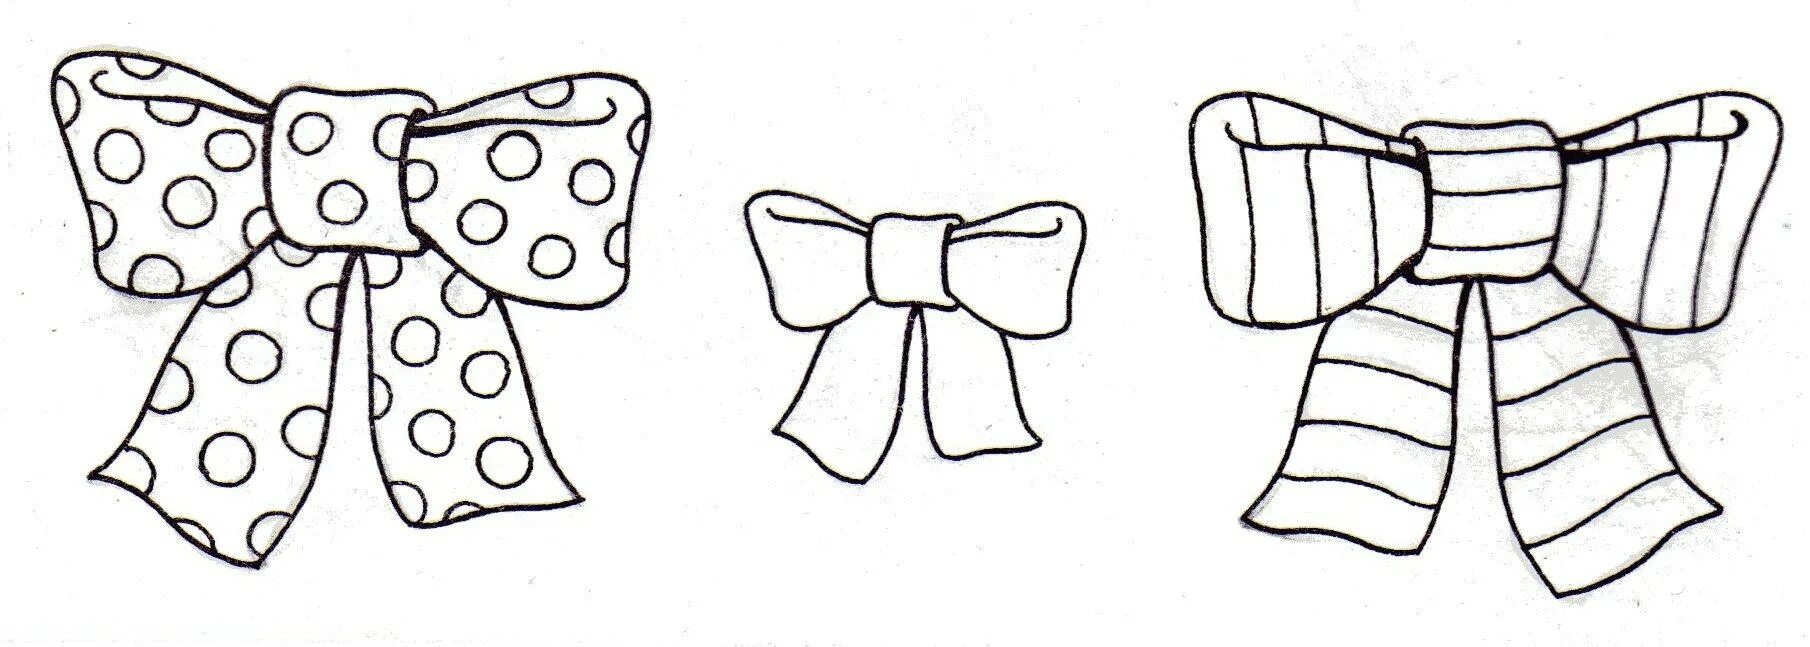 Adorable bow coloring page for preschoolers